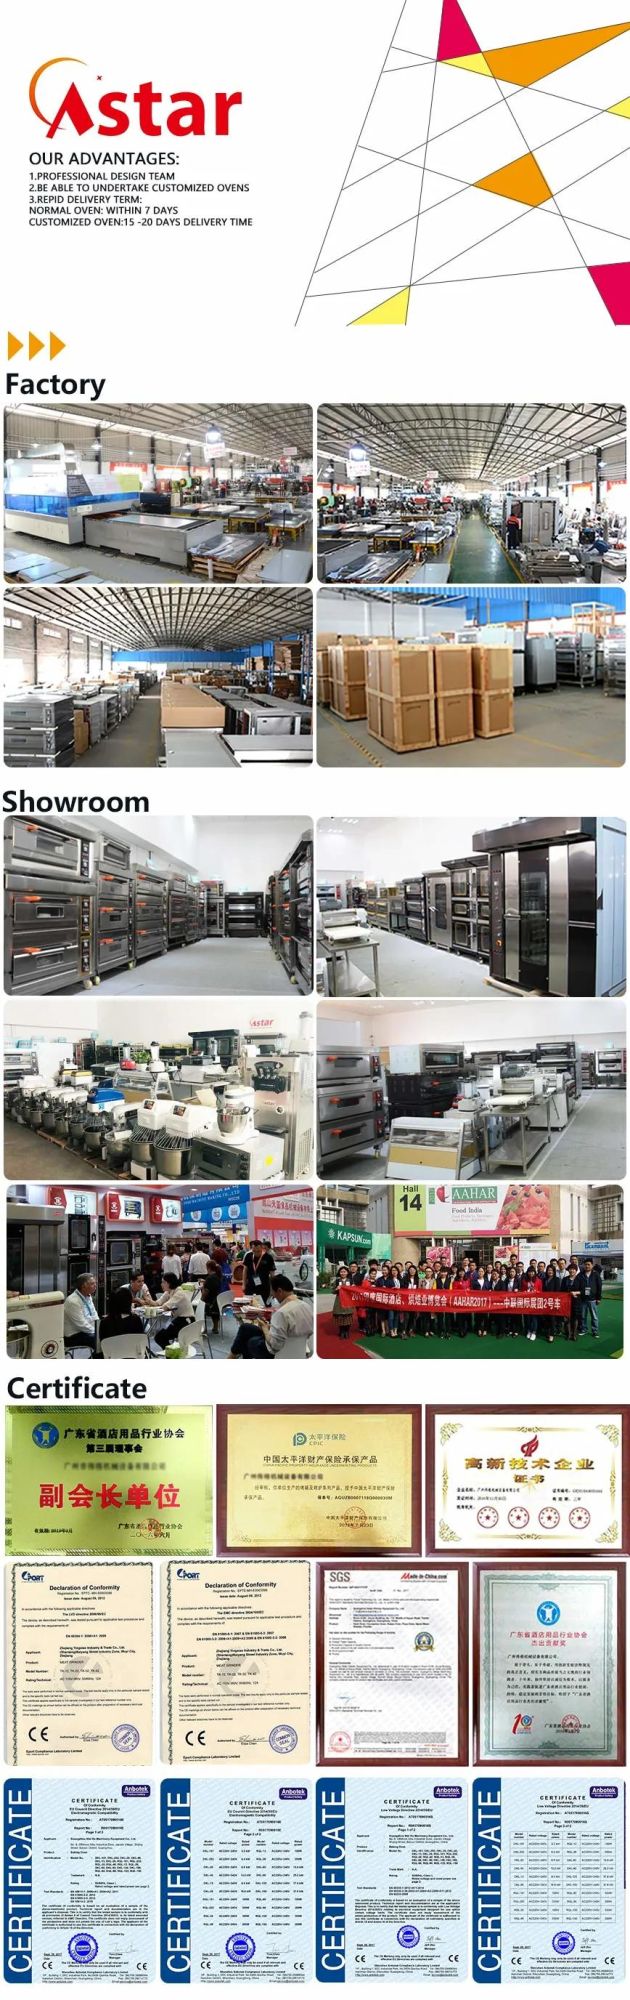 Crown B Series Bakey Equipment Commercial 1 Deck 2 Trays Gas Baking Oven (HGB-20Q)